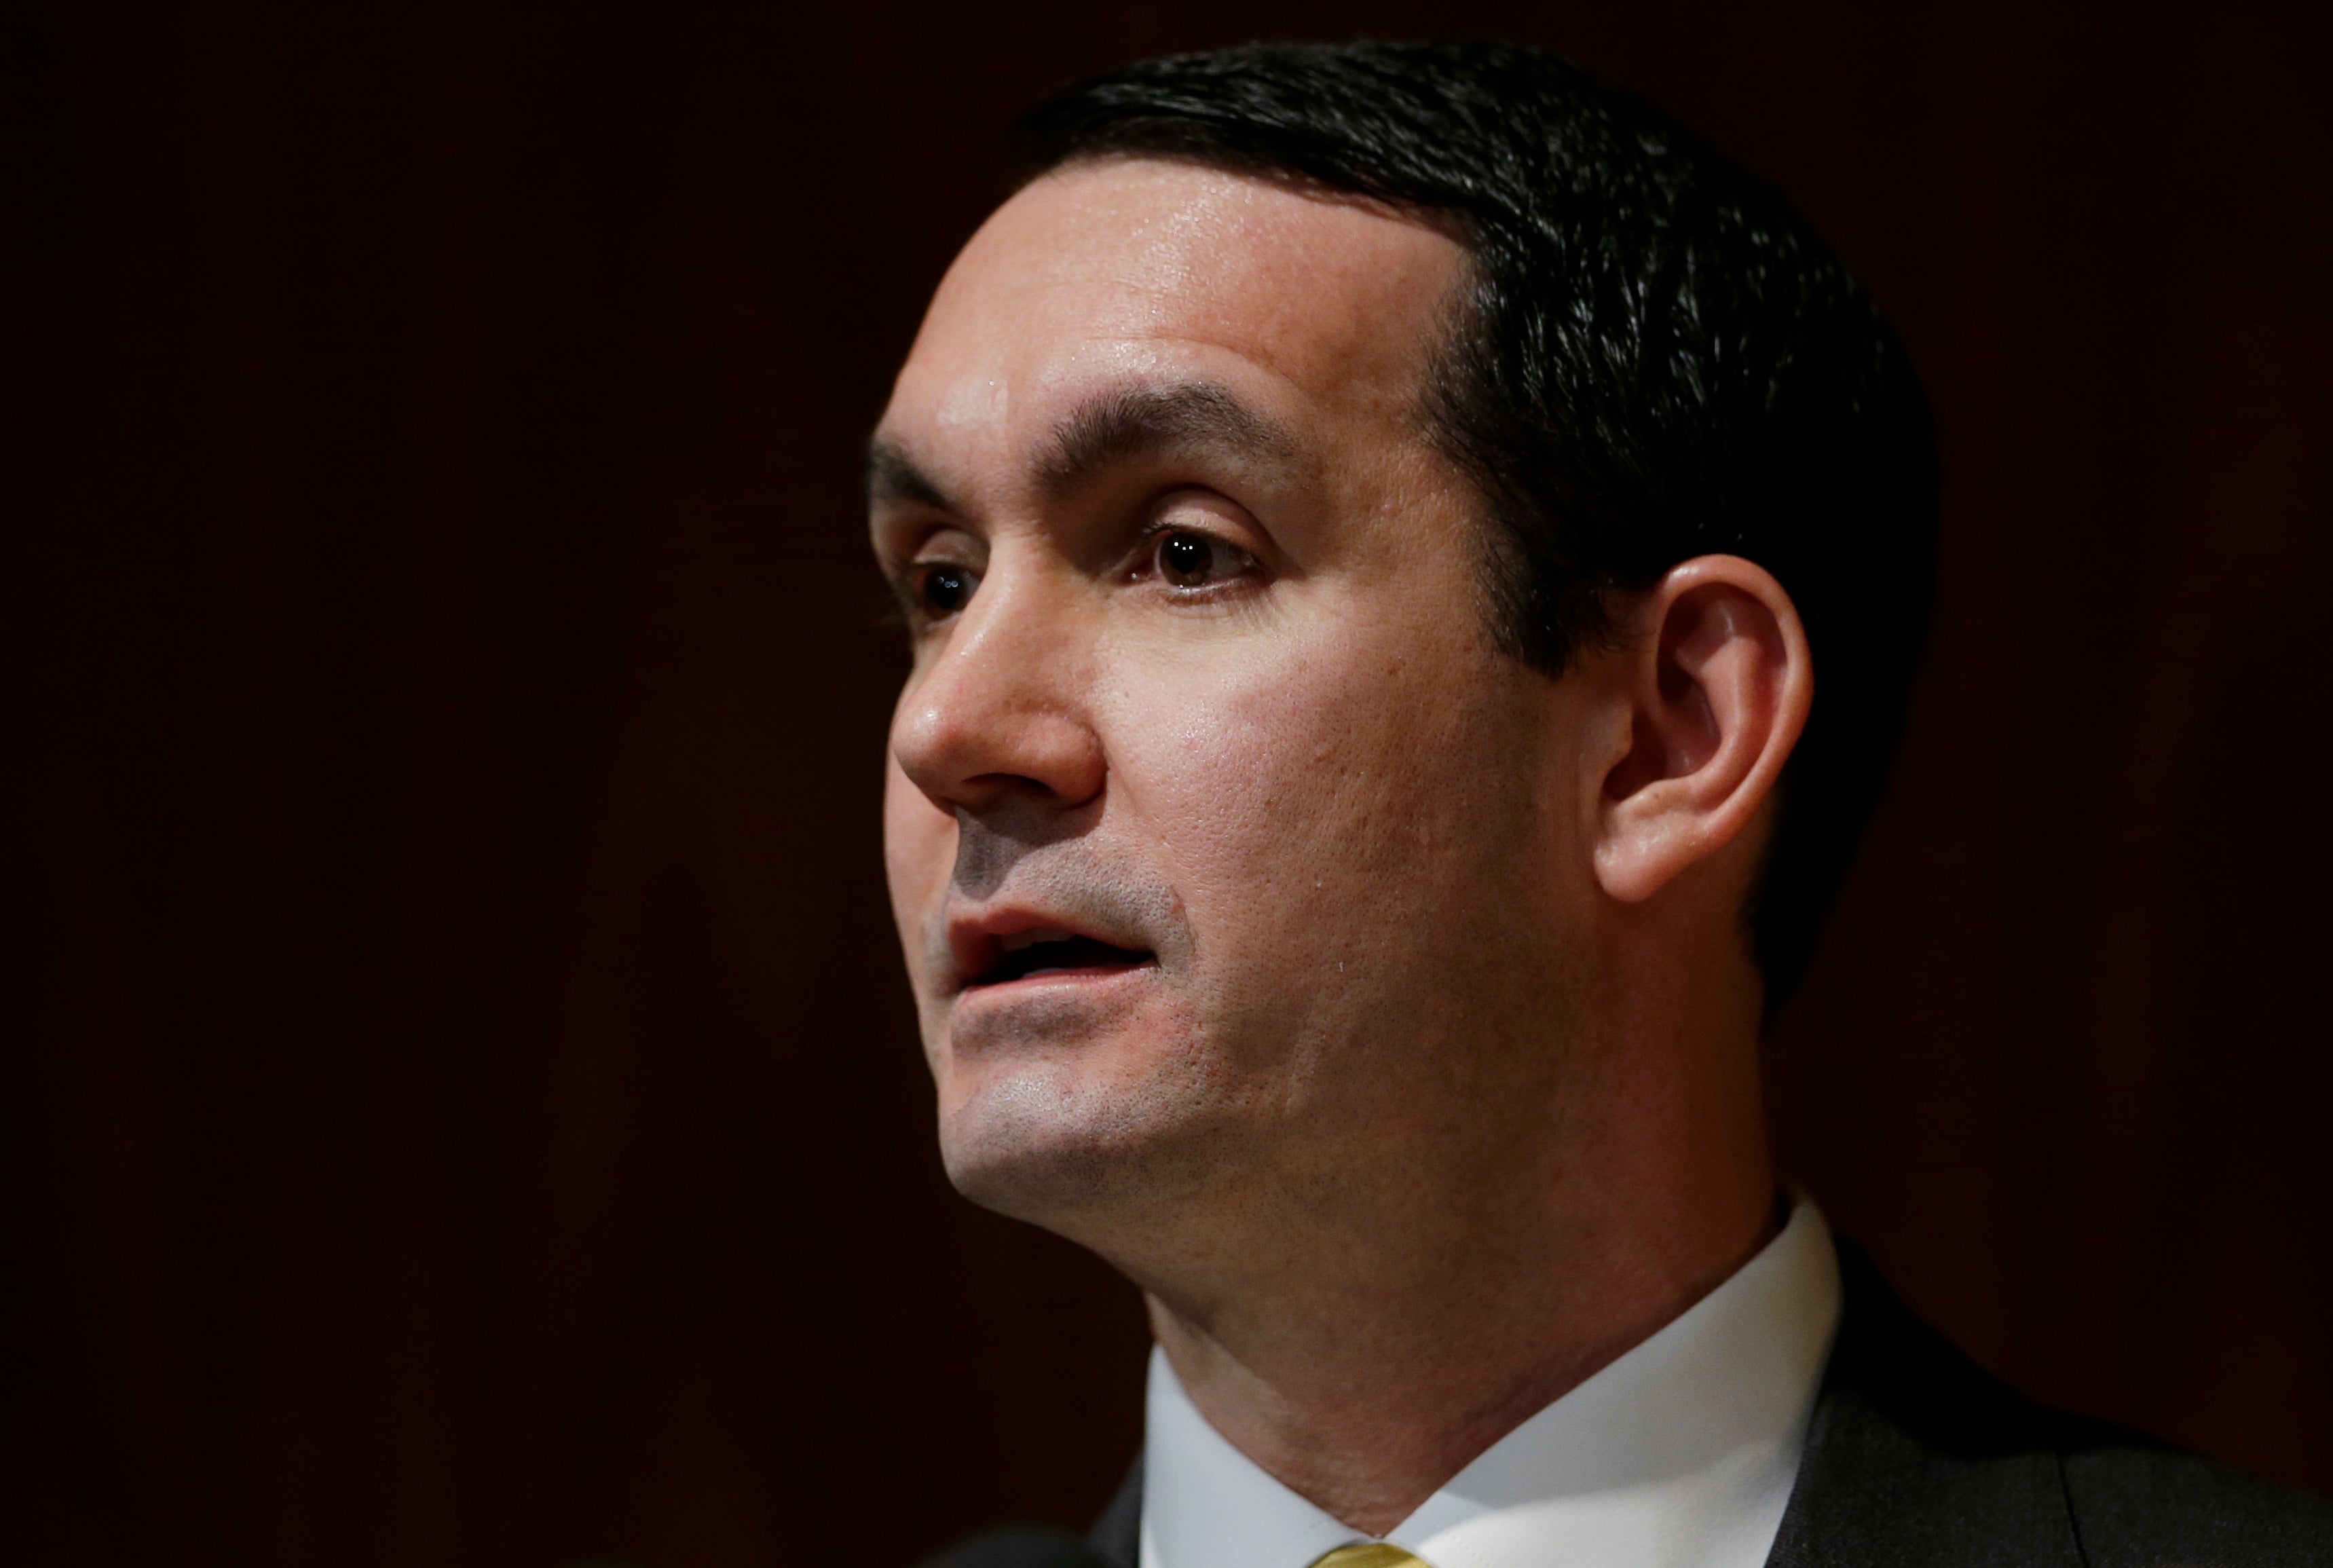 Pennsylvania Auditor General Eugene DePasquale says the process for addressing   charter school payment appeals is unclear and should be re-examined. (AP file photo)